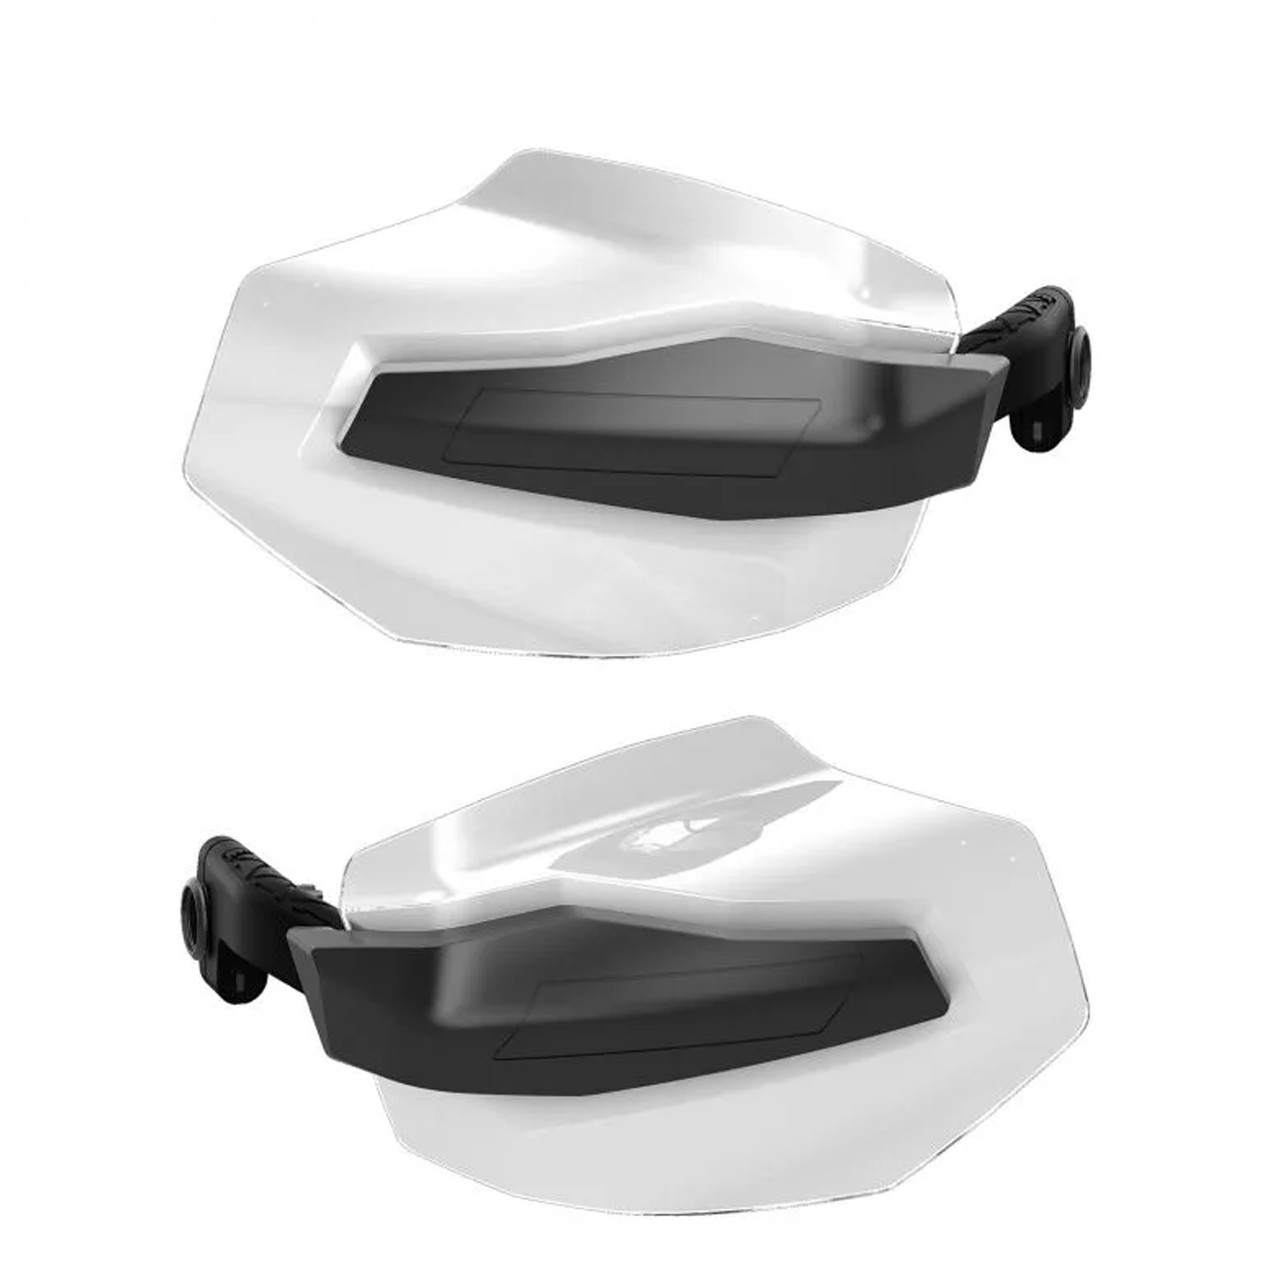 Sea-Doo New OEM, RXT Wind Deflectors For Handlebar (Sold In Pairs), 295100762